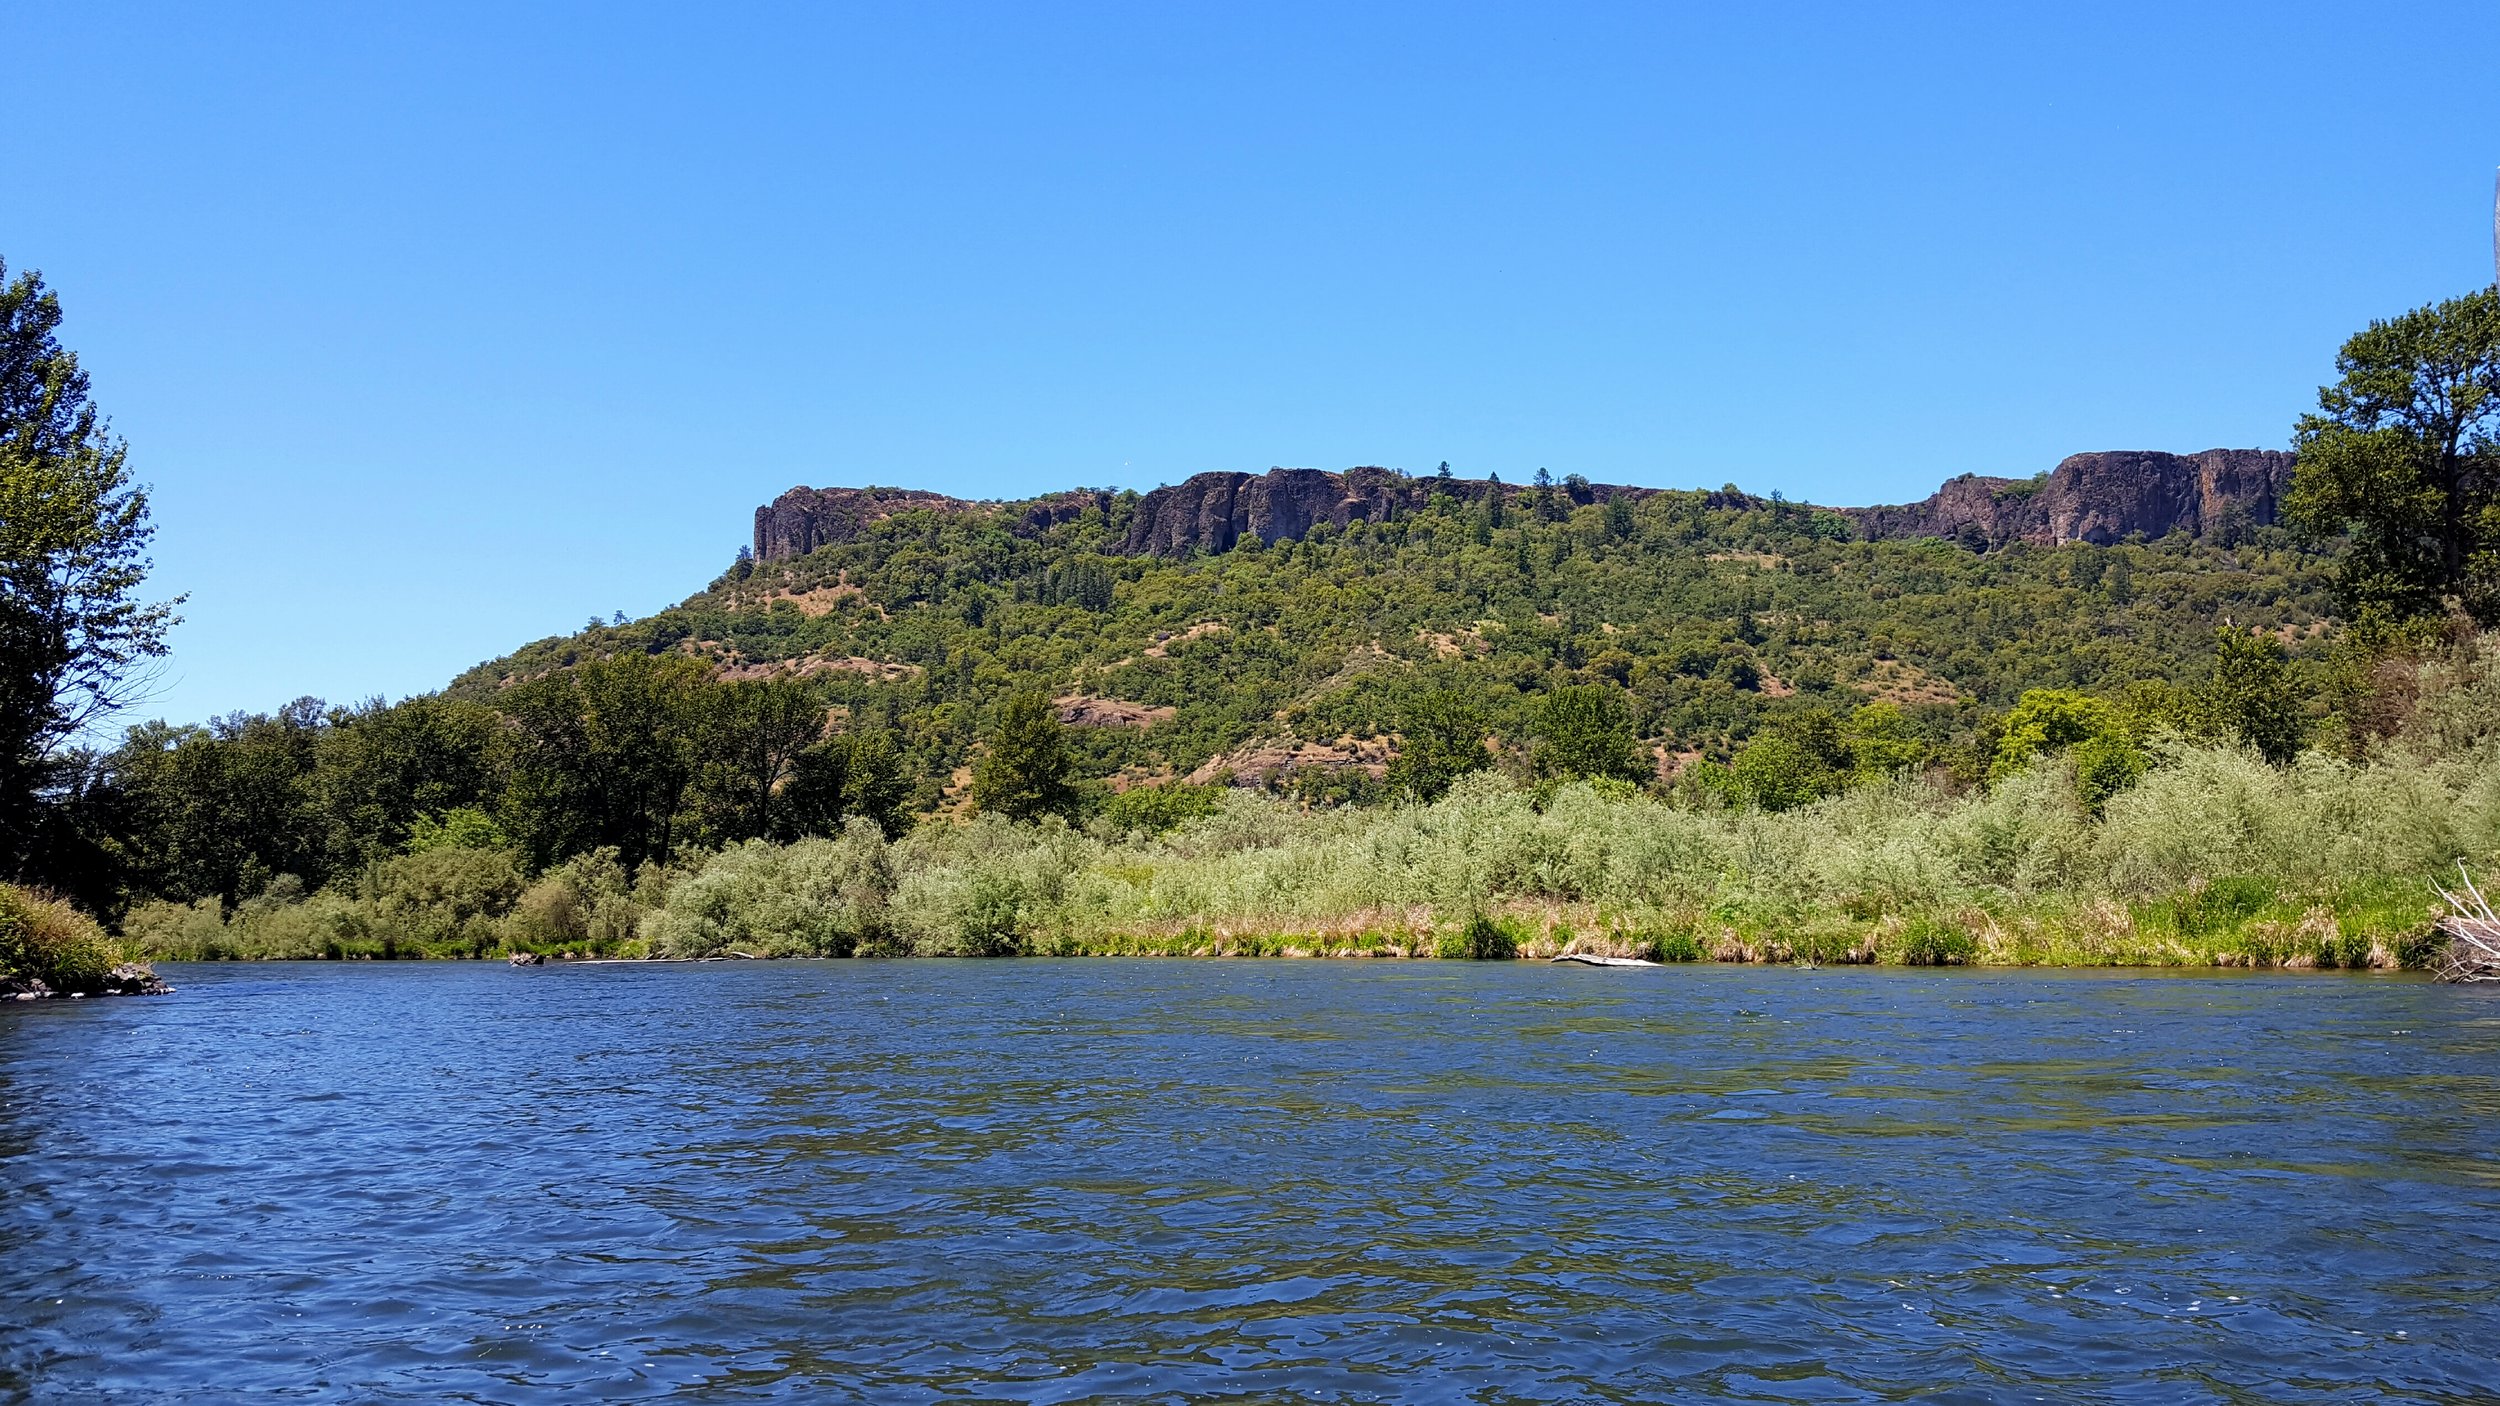 ROGUE JET BOAT ADVENTURES - LOWER TABLE ROCK - WHAT TO DO IN SOUTHERN OREGON